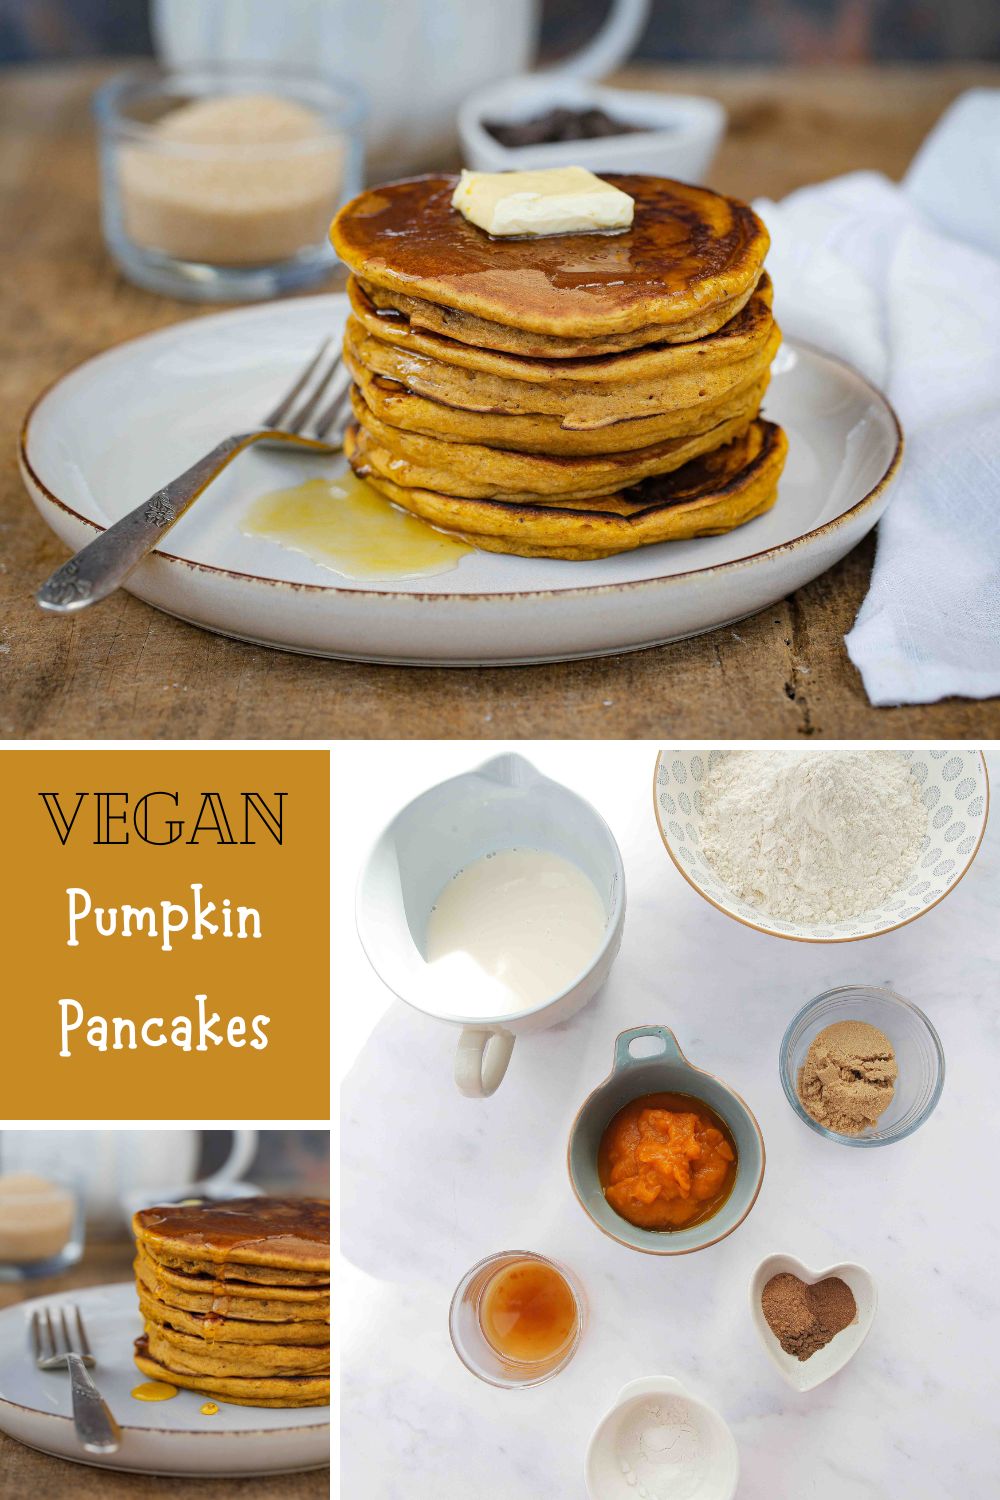 These easy to make, super fluffy vegan pumpkin pancakes with warming spices are the perfect cosy autumn breakfast! Recipe on thecookandhim.com | #pumpkinpancakes #veganpancakes #fluffyveganpancakes #veganbreakfast #eggfreepancakes #autumnrecipes